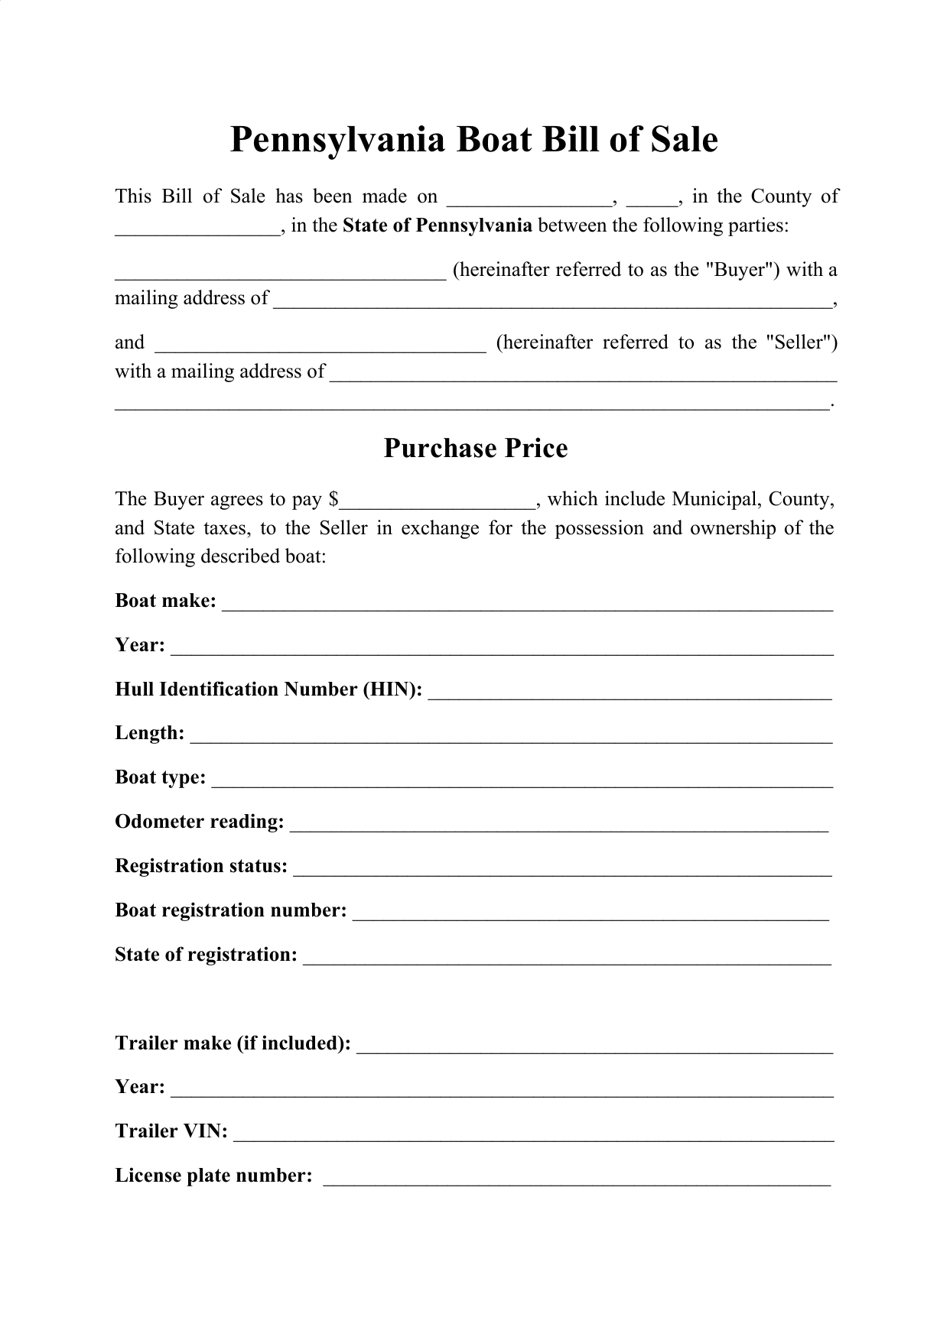 pennsylvania-boat-bill-of-sale-form-fill-out-sign-online-and-download-pdf-templateroller